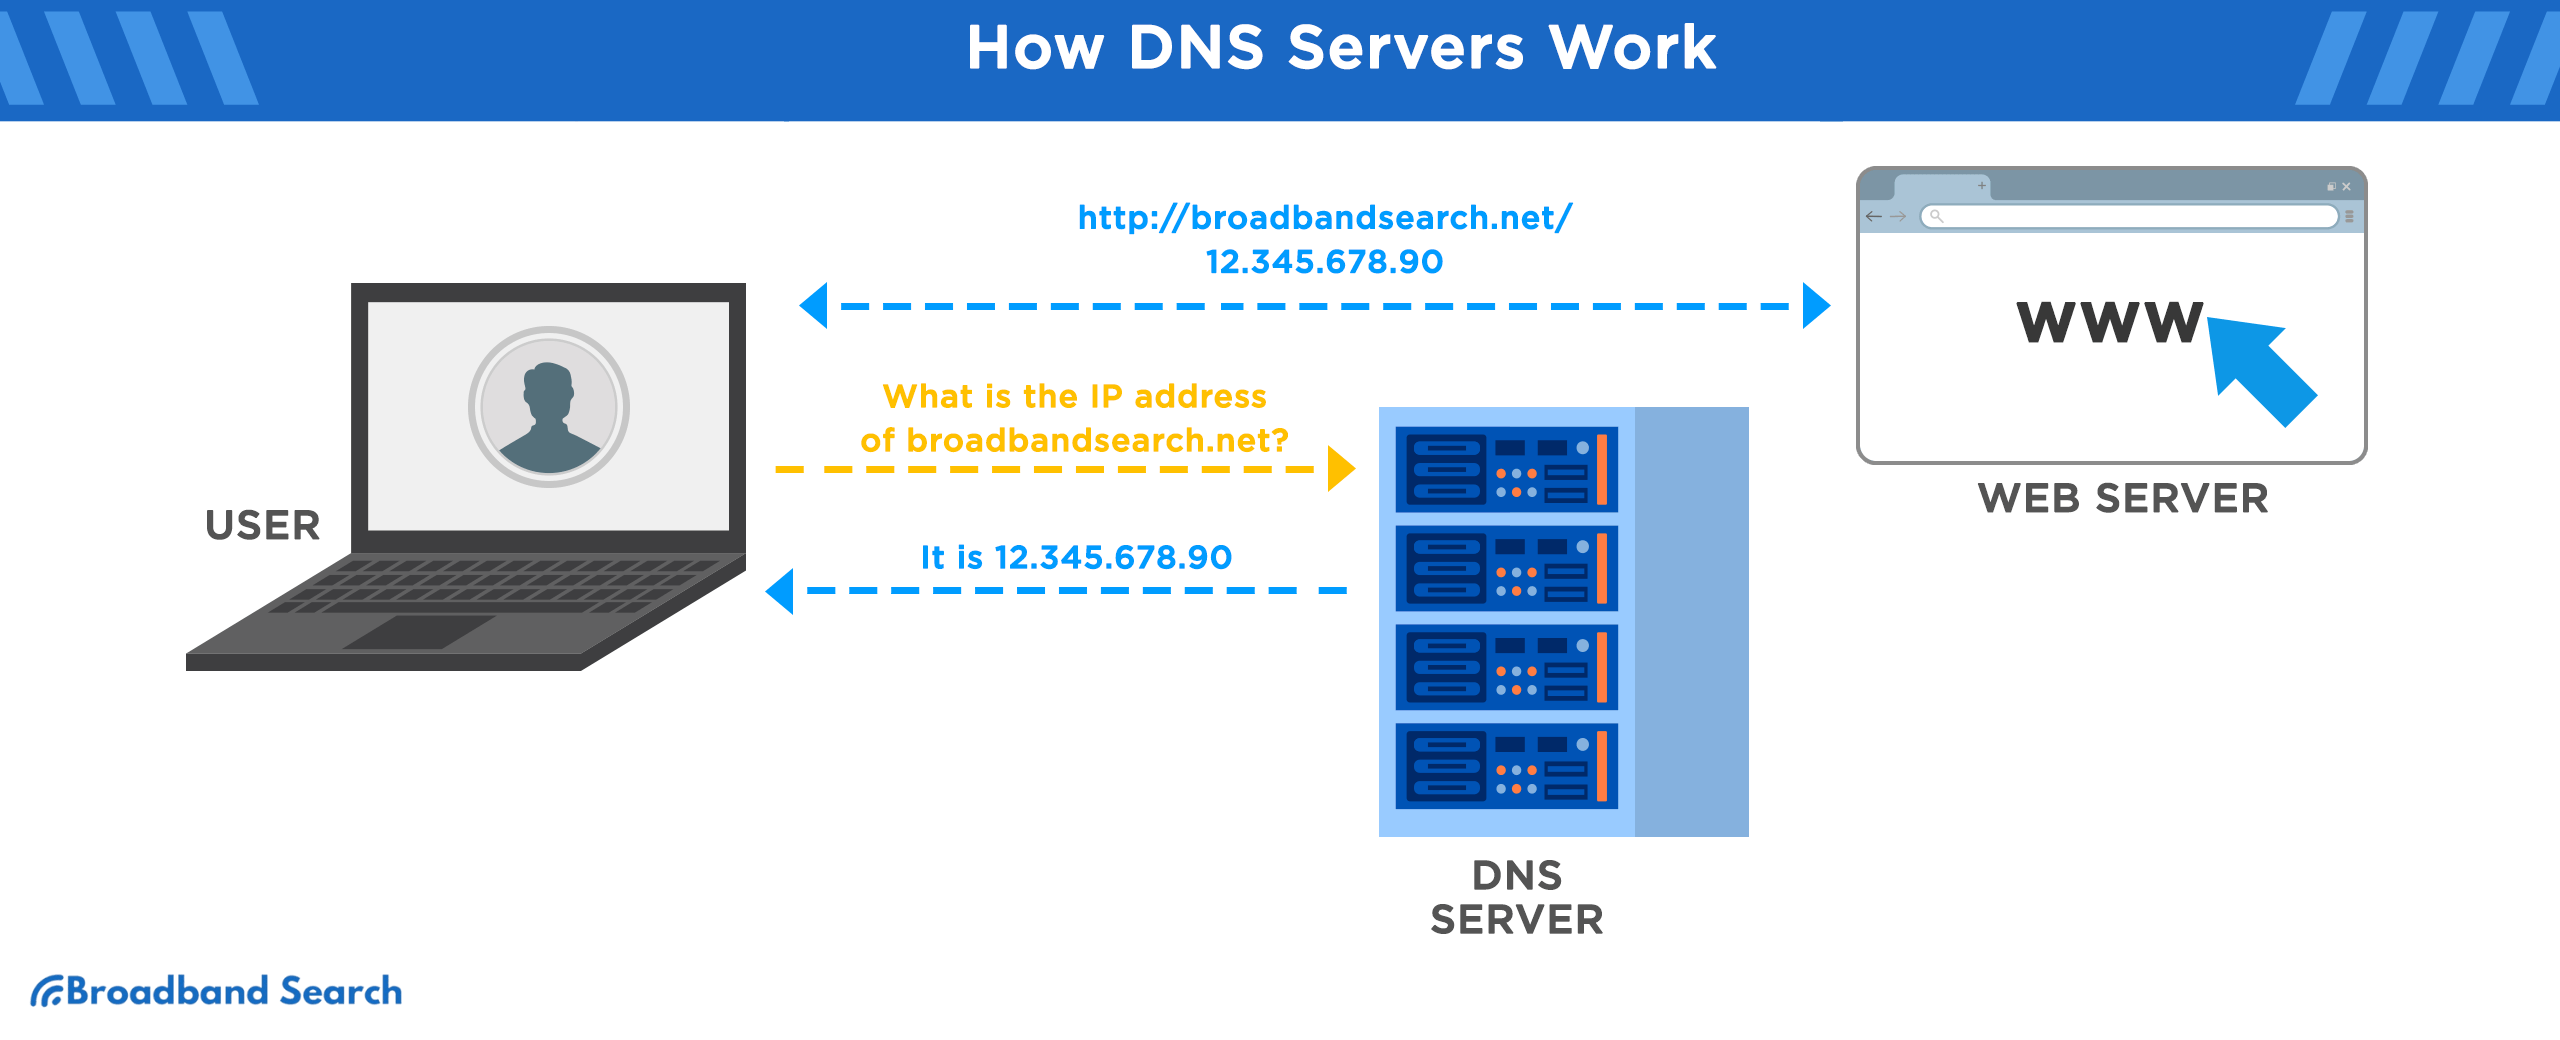 Graphic showing How DNS Servers Work